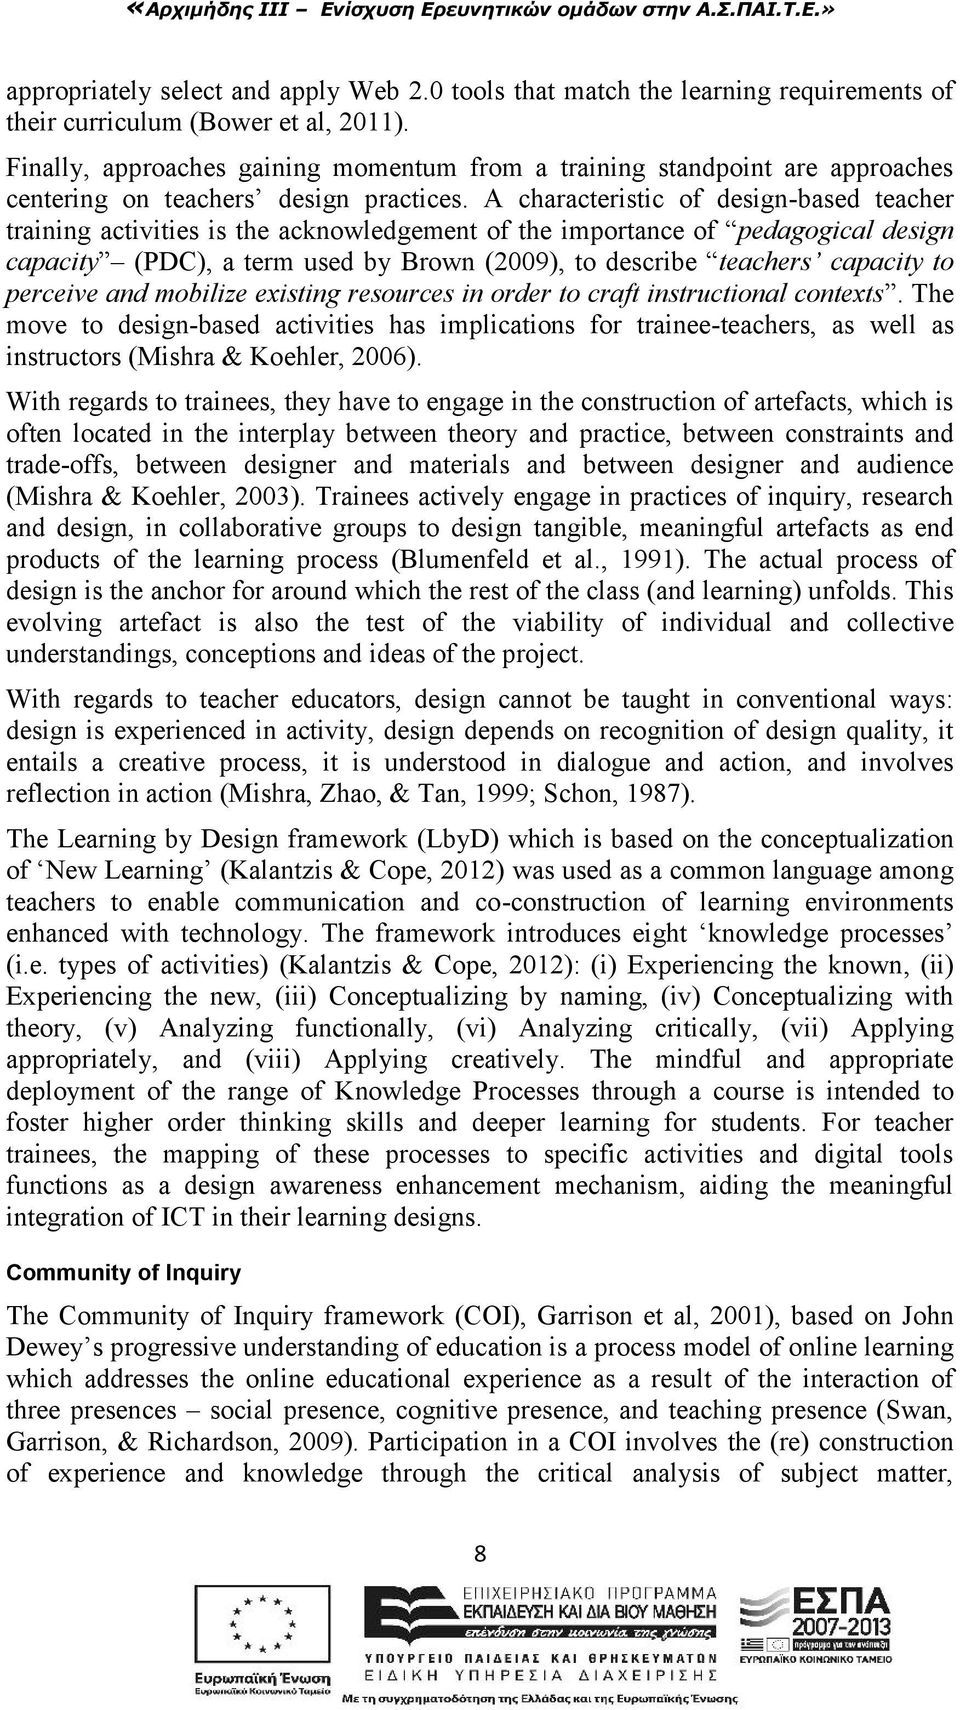 A characteristic of design-based teacher training activities is the acknowledgement of the importance of pedagogical design capacity (PDC), a term used by Brown (2009), to describe teachers capacity